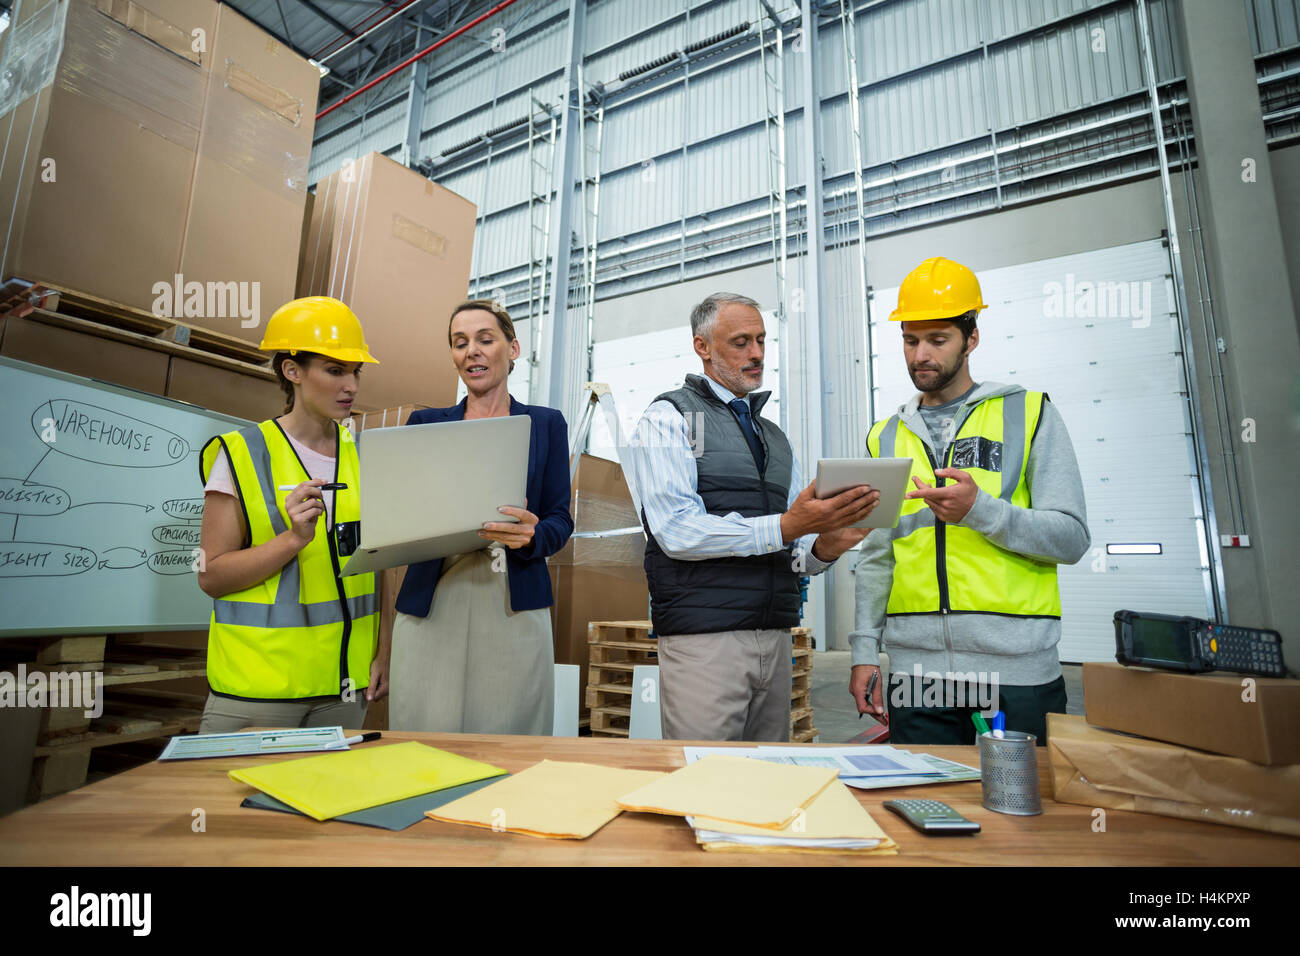 Warehouse managers and workers discussing with laptop and digital tablet Stock Photo